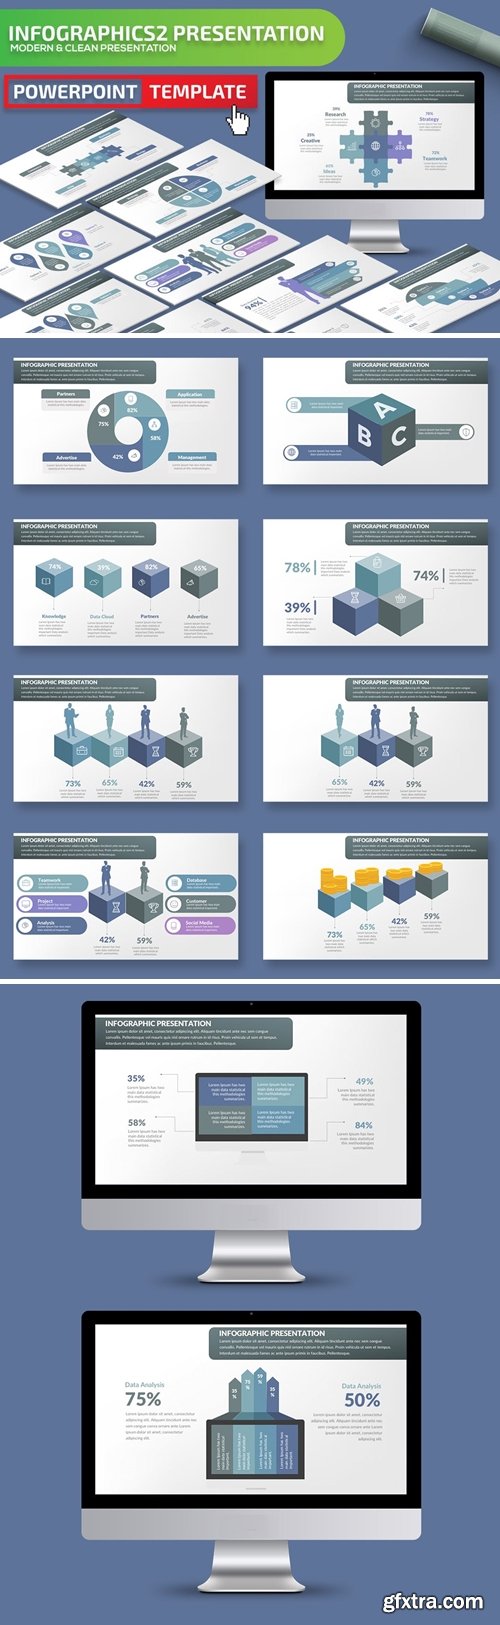 Infographic2 Powerpoint, Keynote and Google Slides Templates